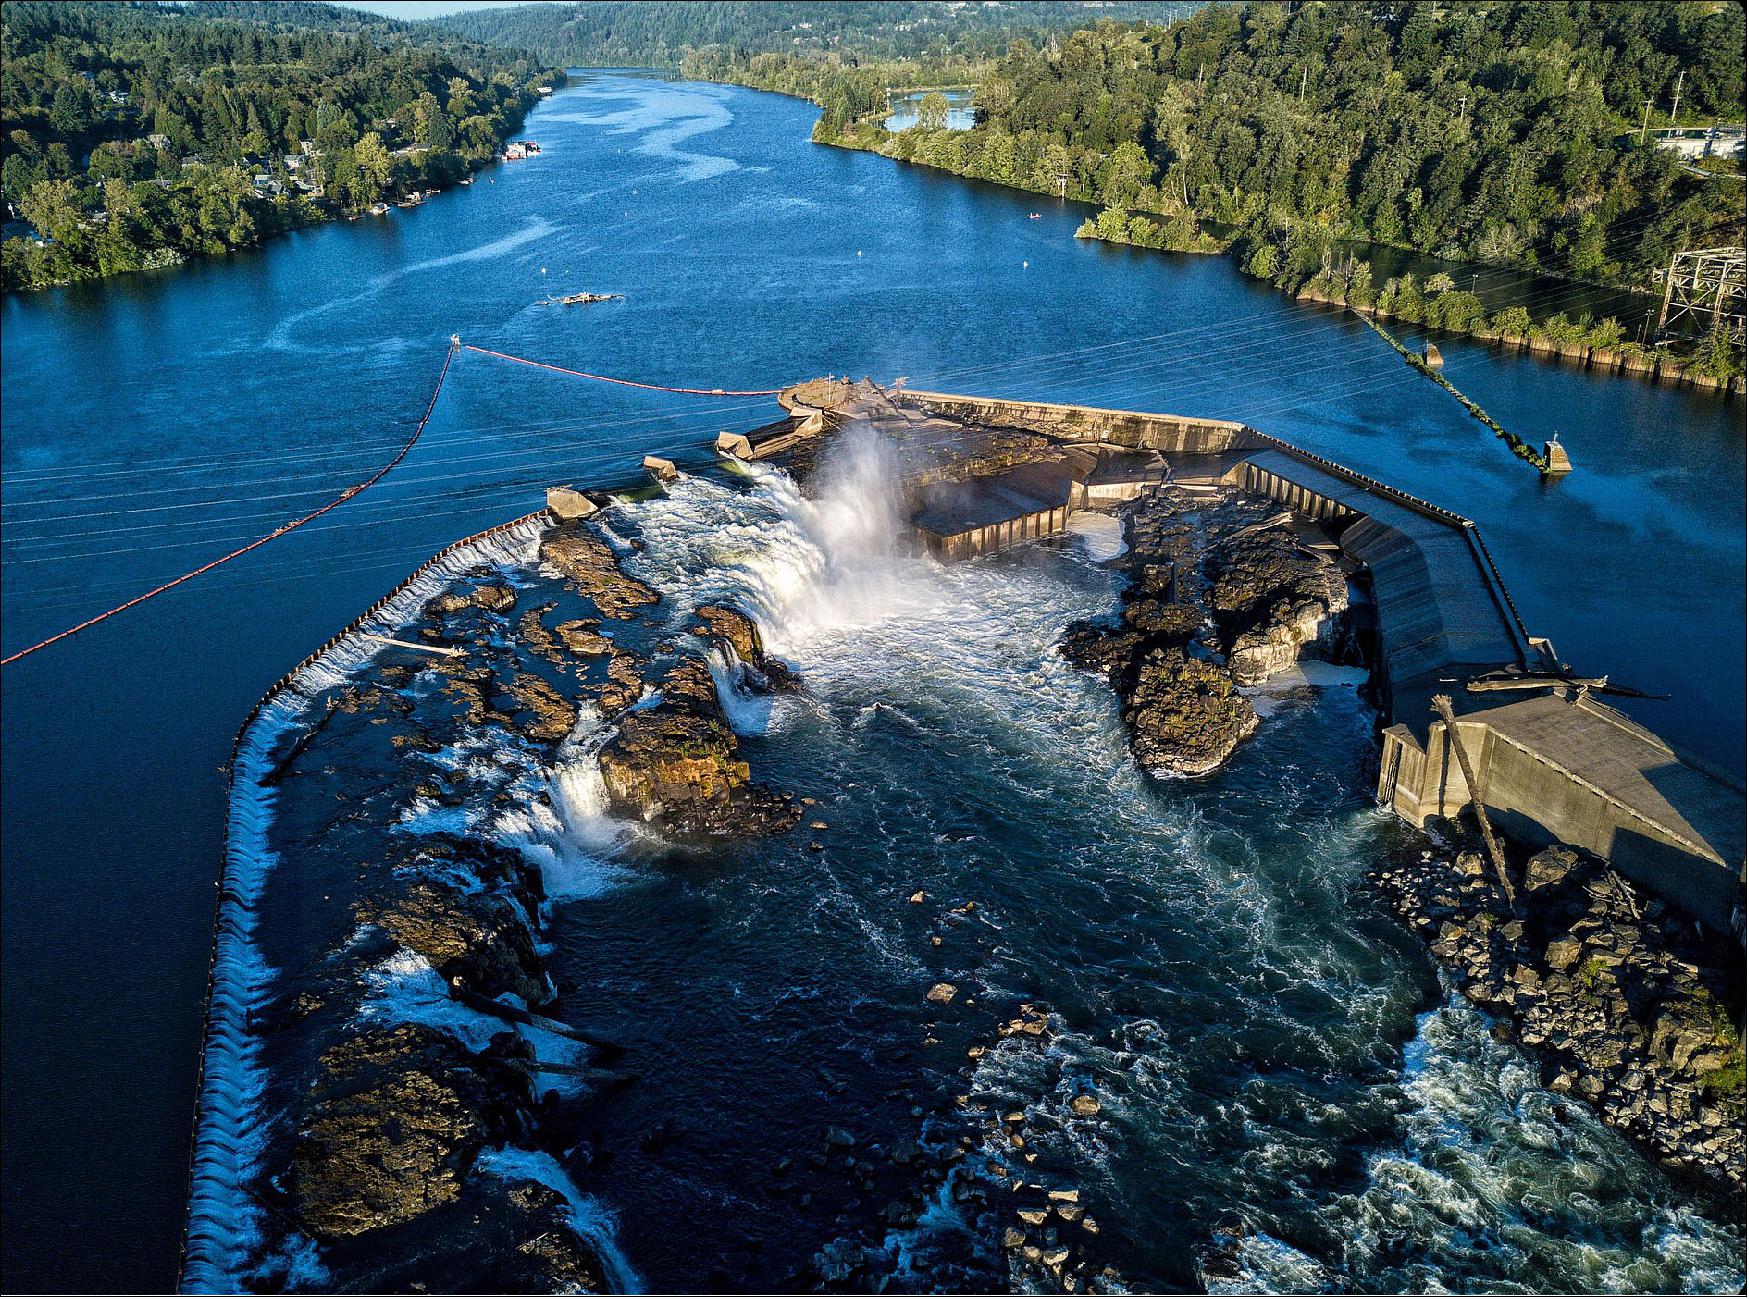 Figure 1: Once in orbit, the SWOT mission will regularly monitor not only mighty rivers like Oregon’s Willamette, pictured, but also smaller waterways that are at least 330 feet (100 m) across (image credit: U.S. Department of Energy)